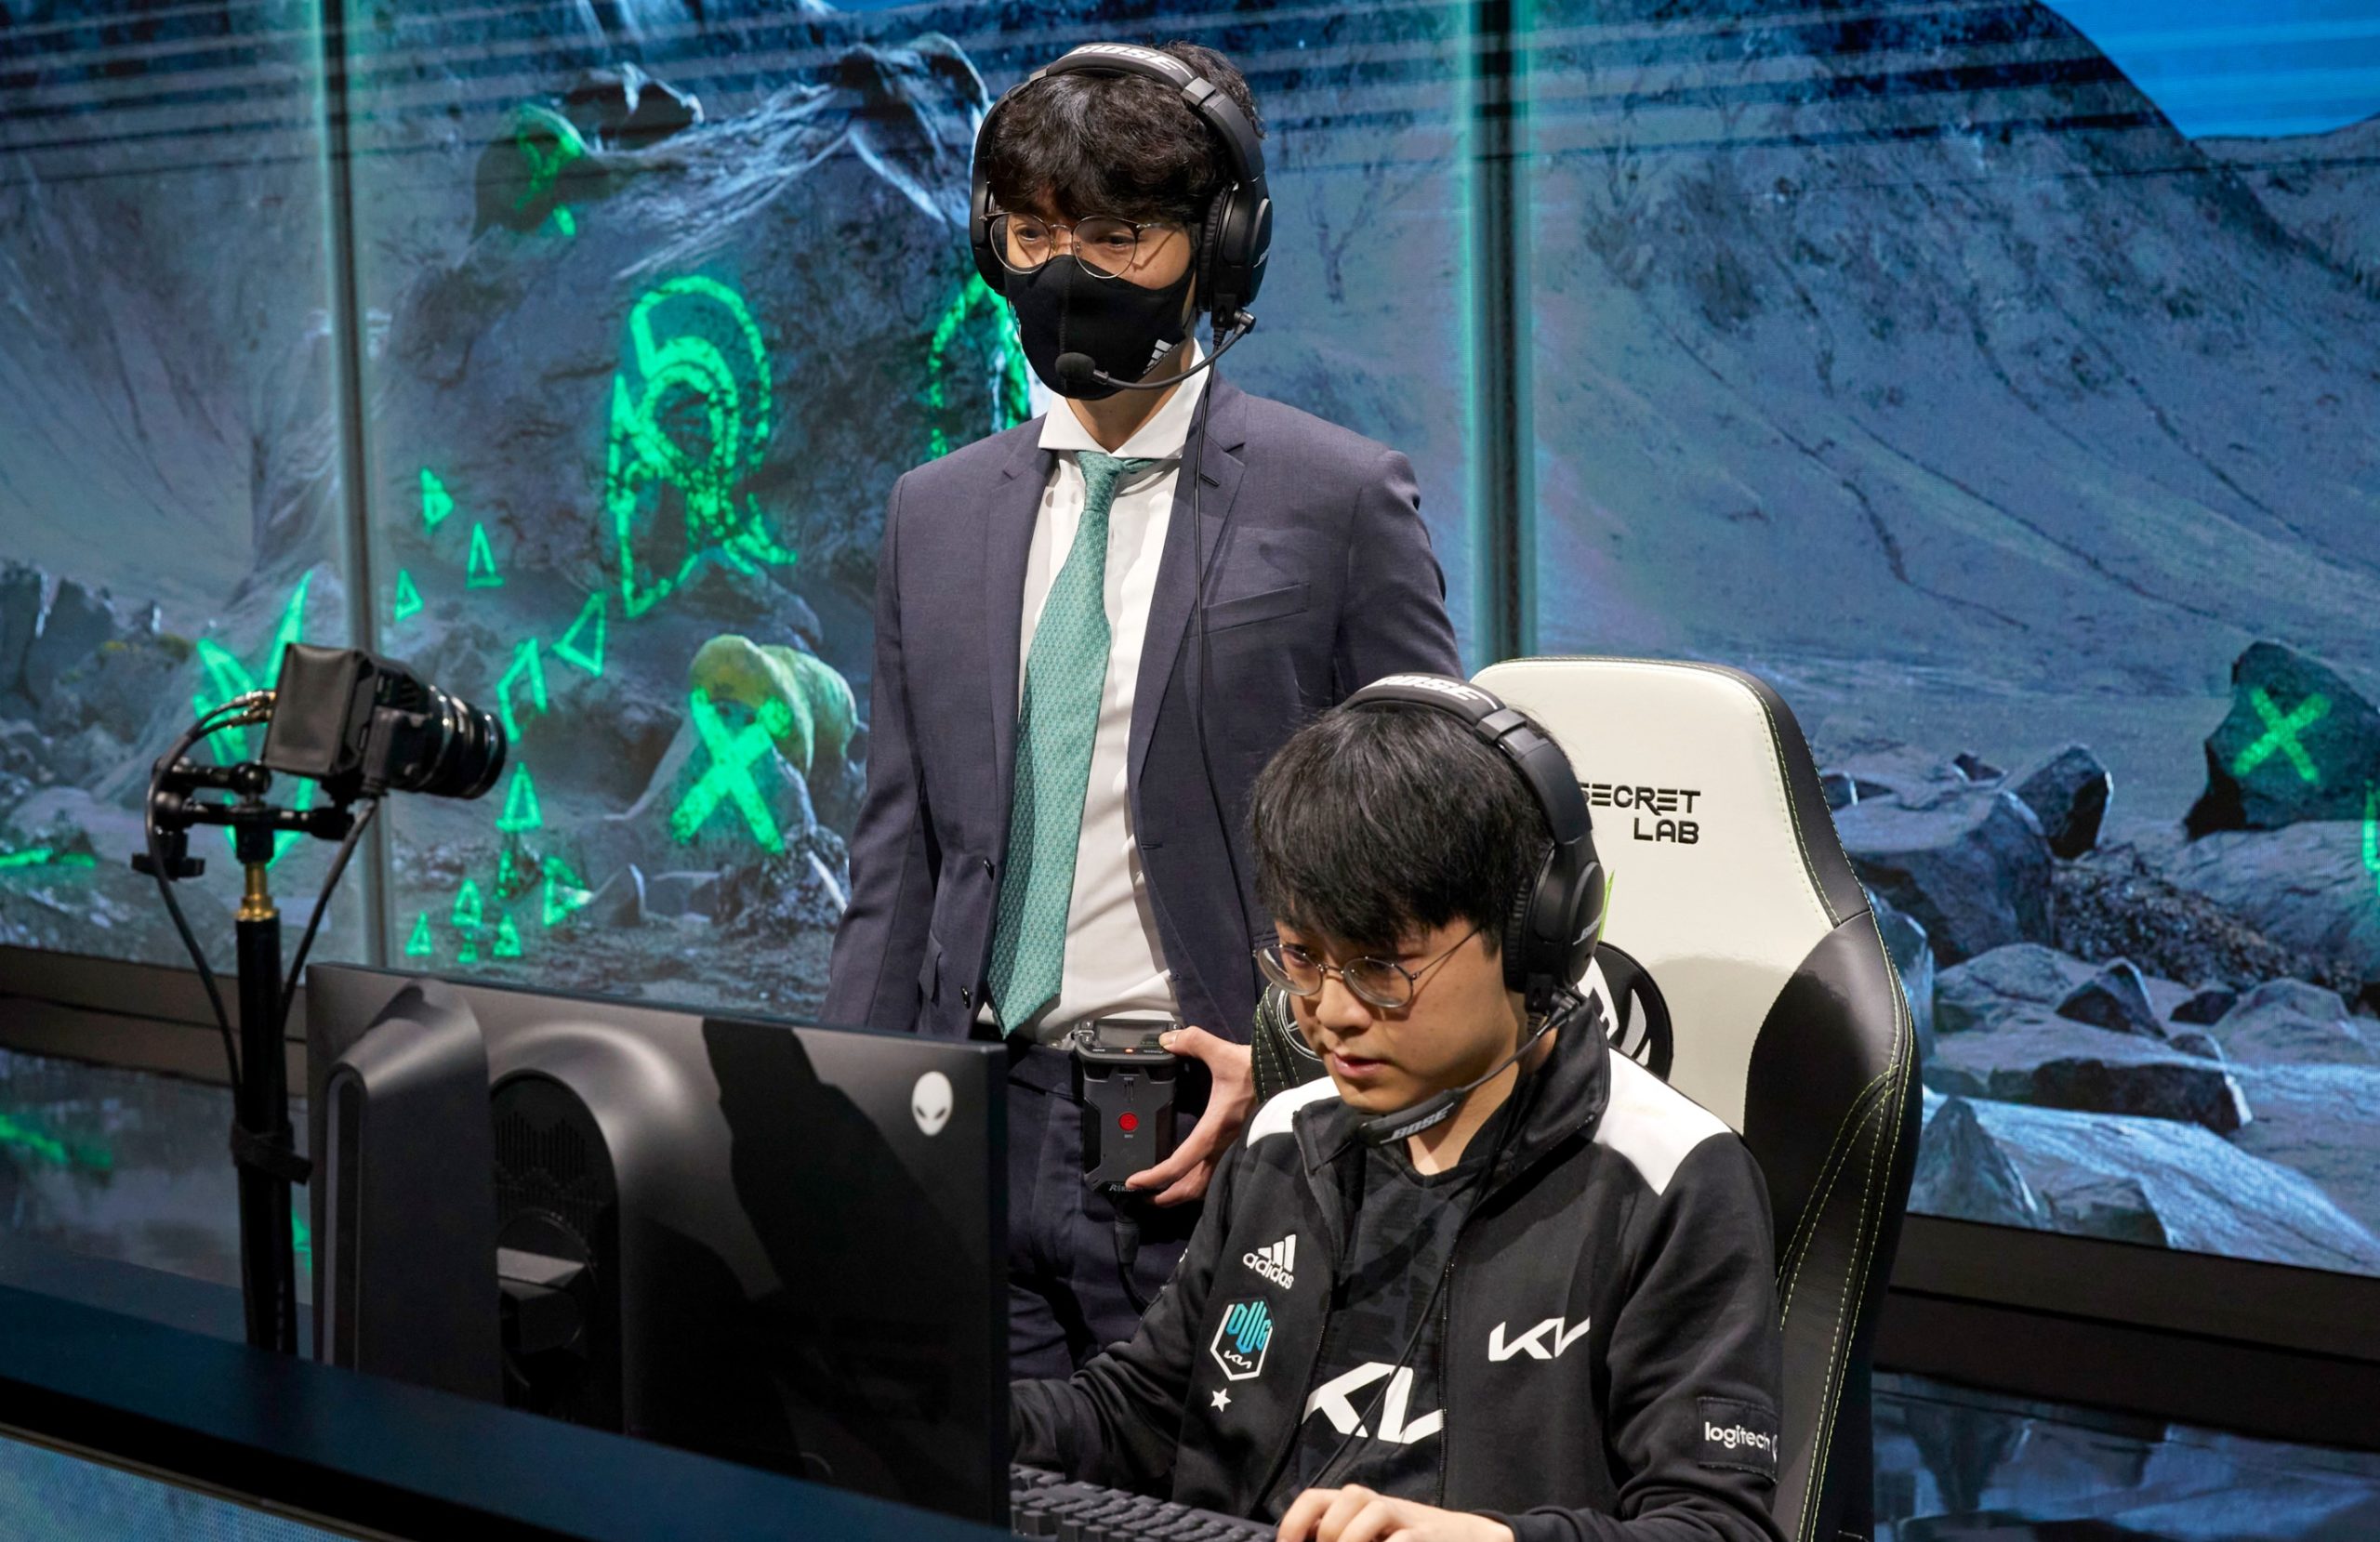 nøgen Intrusion patient ShowMaker led all players at MSI 2021 in number of champions played  throughout the tournament - Dot Esports